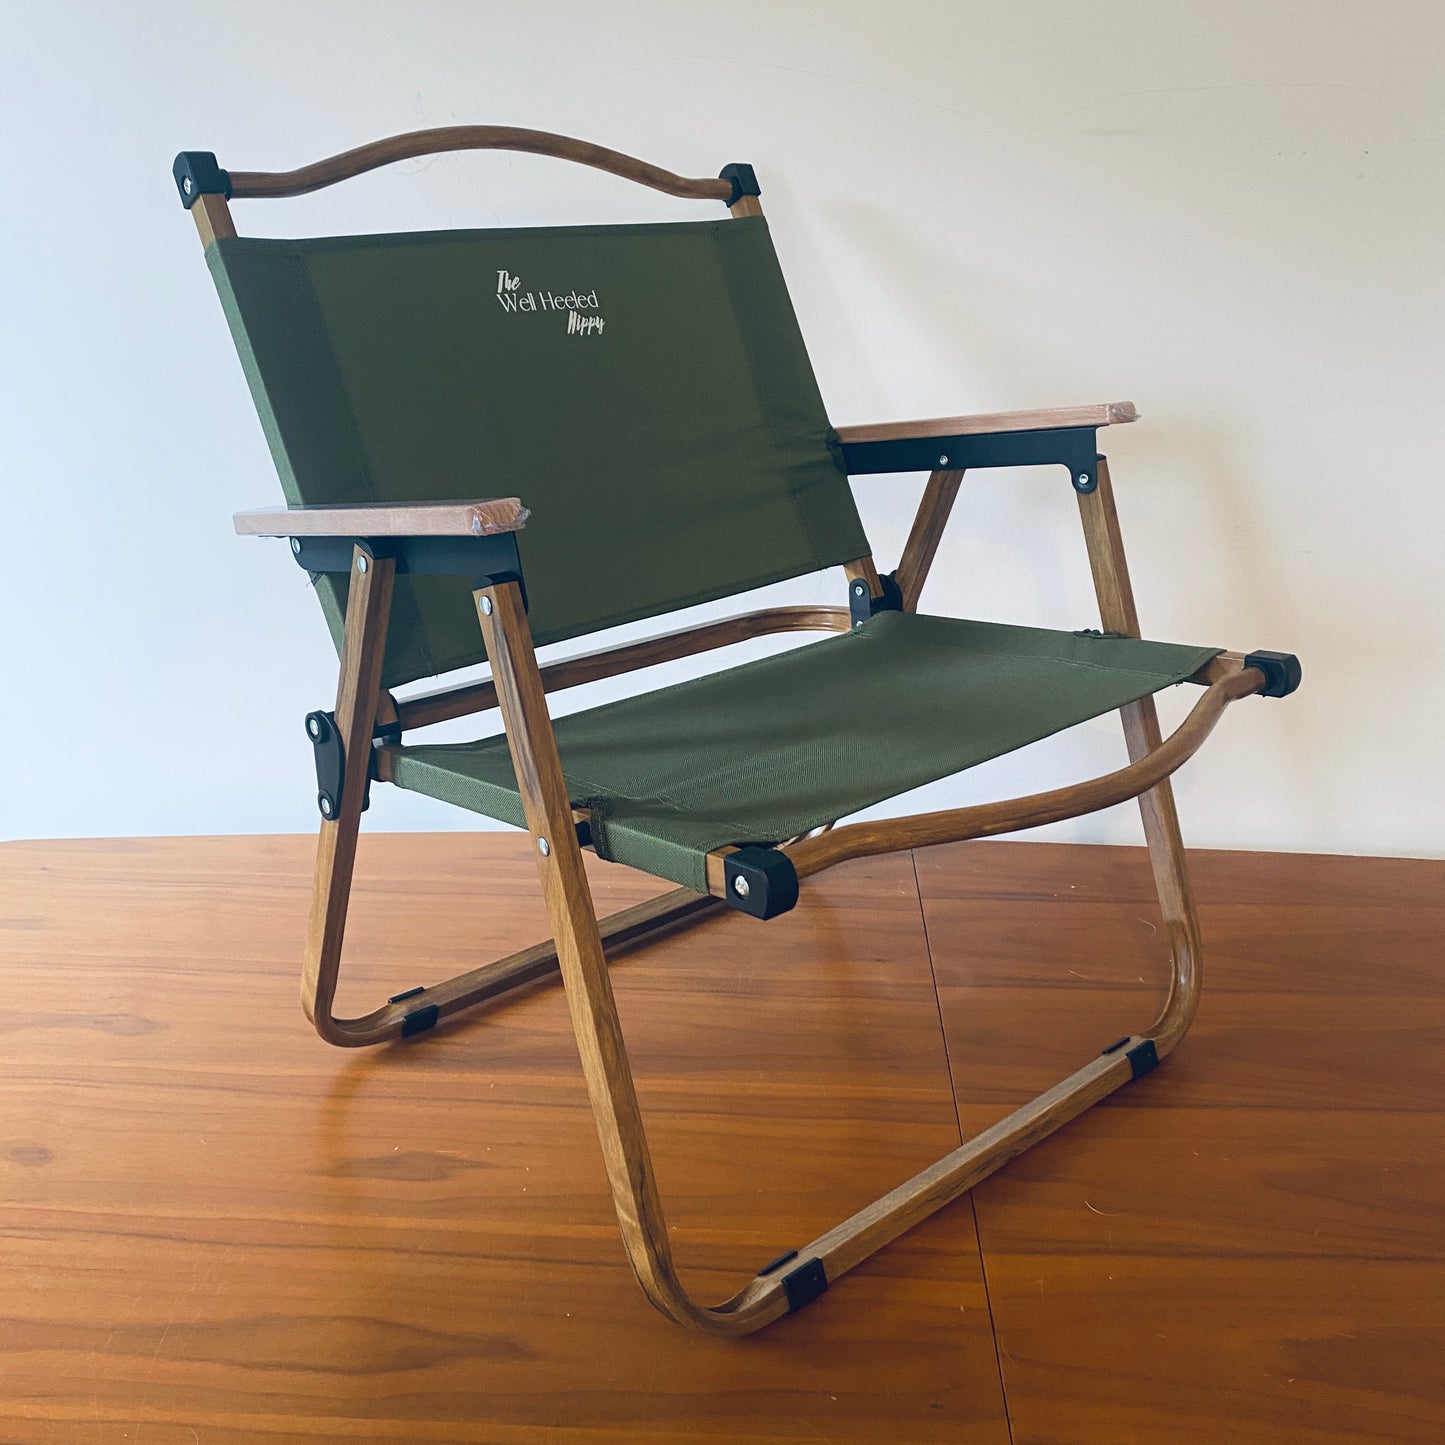 A foldable, portable, luxury safari chair by The Well Heeled Hippy - perfect for patio, festivals, camping and picnicking... shown here in khaki green